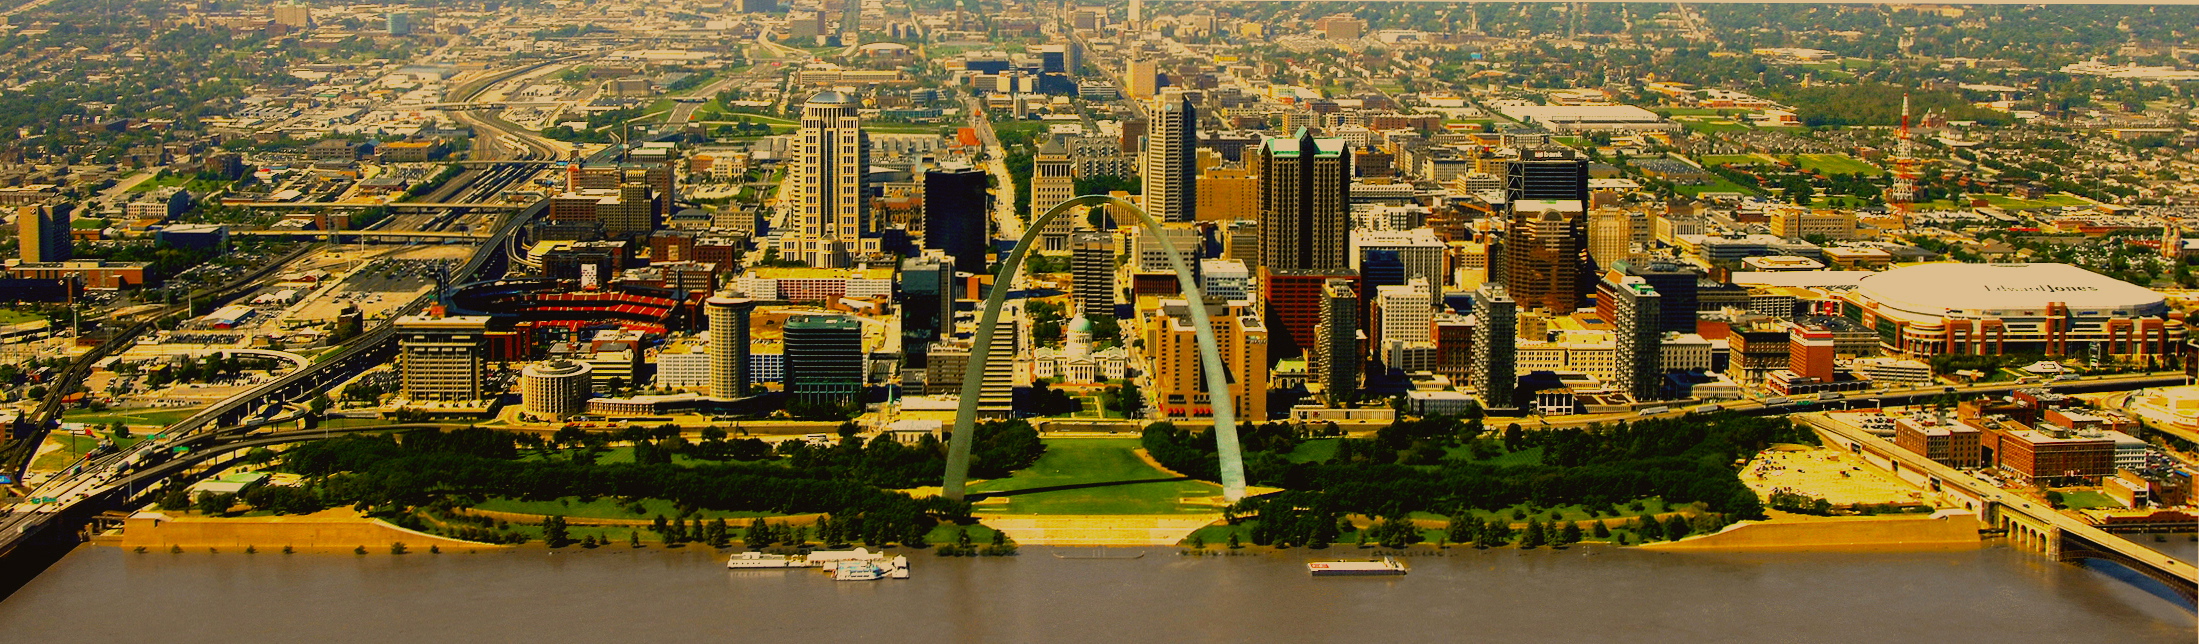 An image of the St. Louis city skyline.